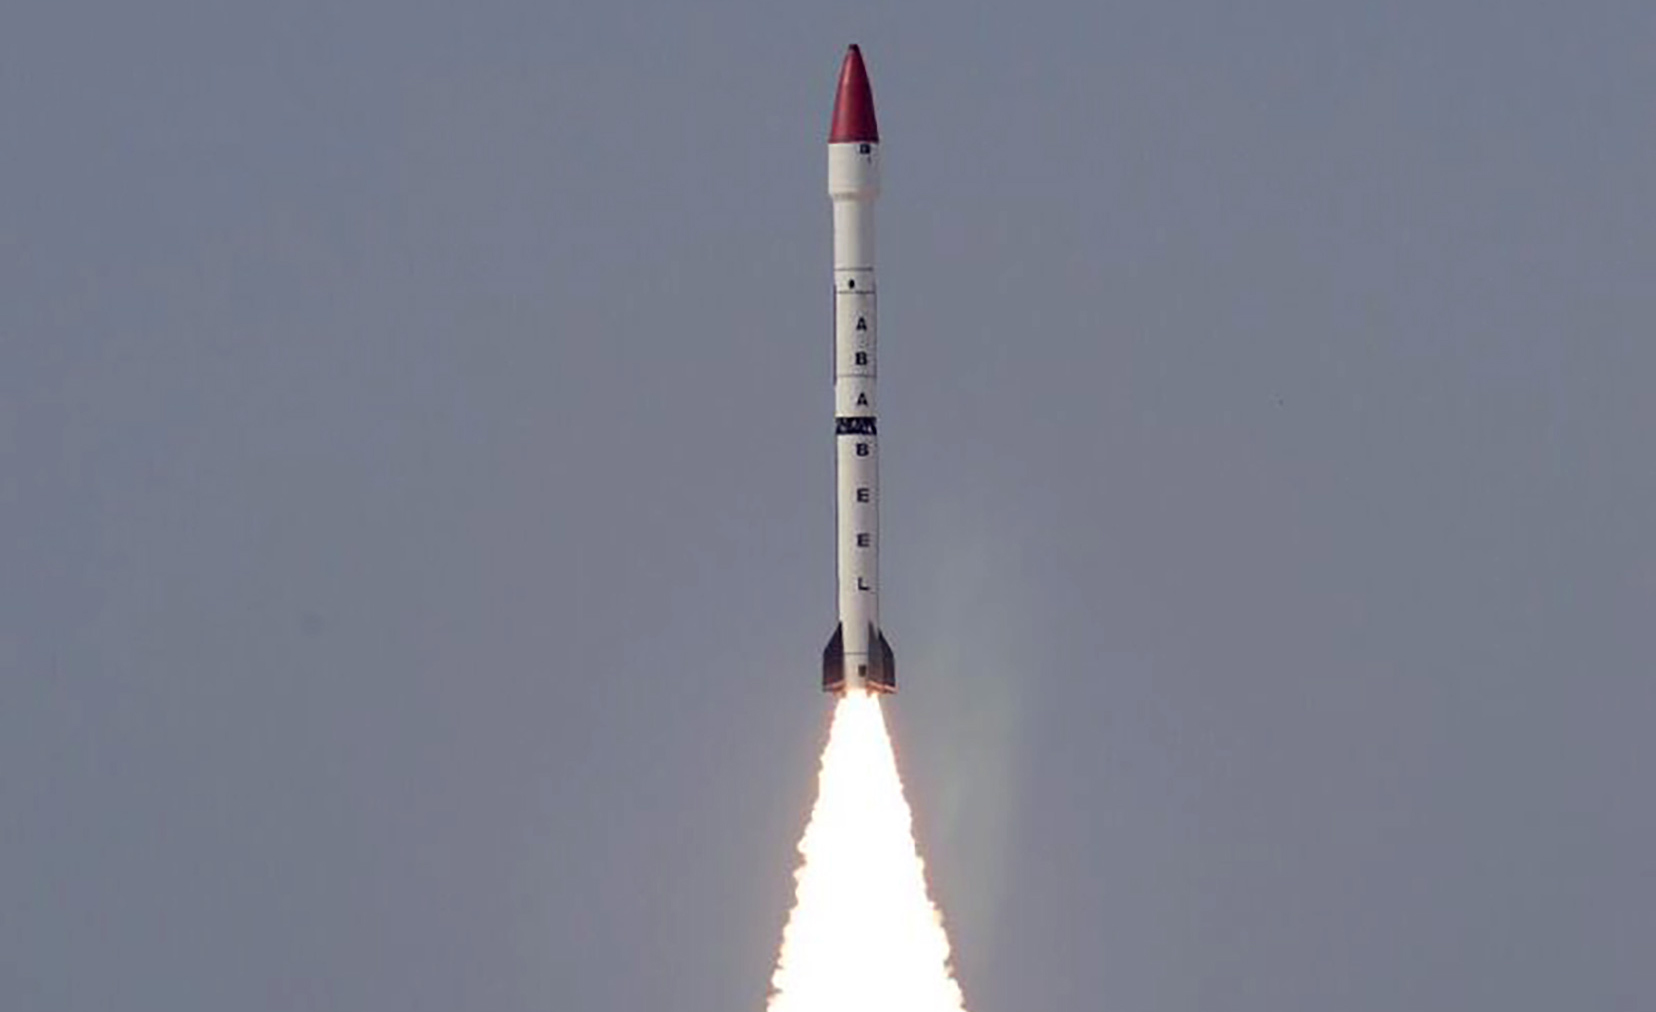 Pakistan conducts first flight test of nuclear-capable Ababeel missile